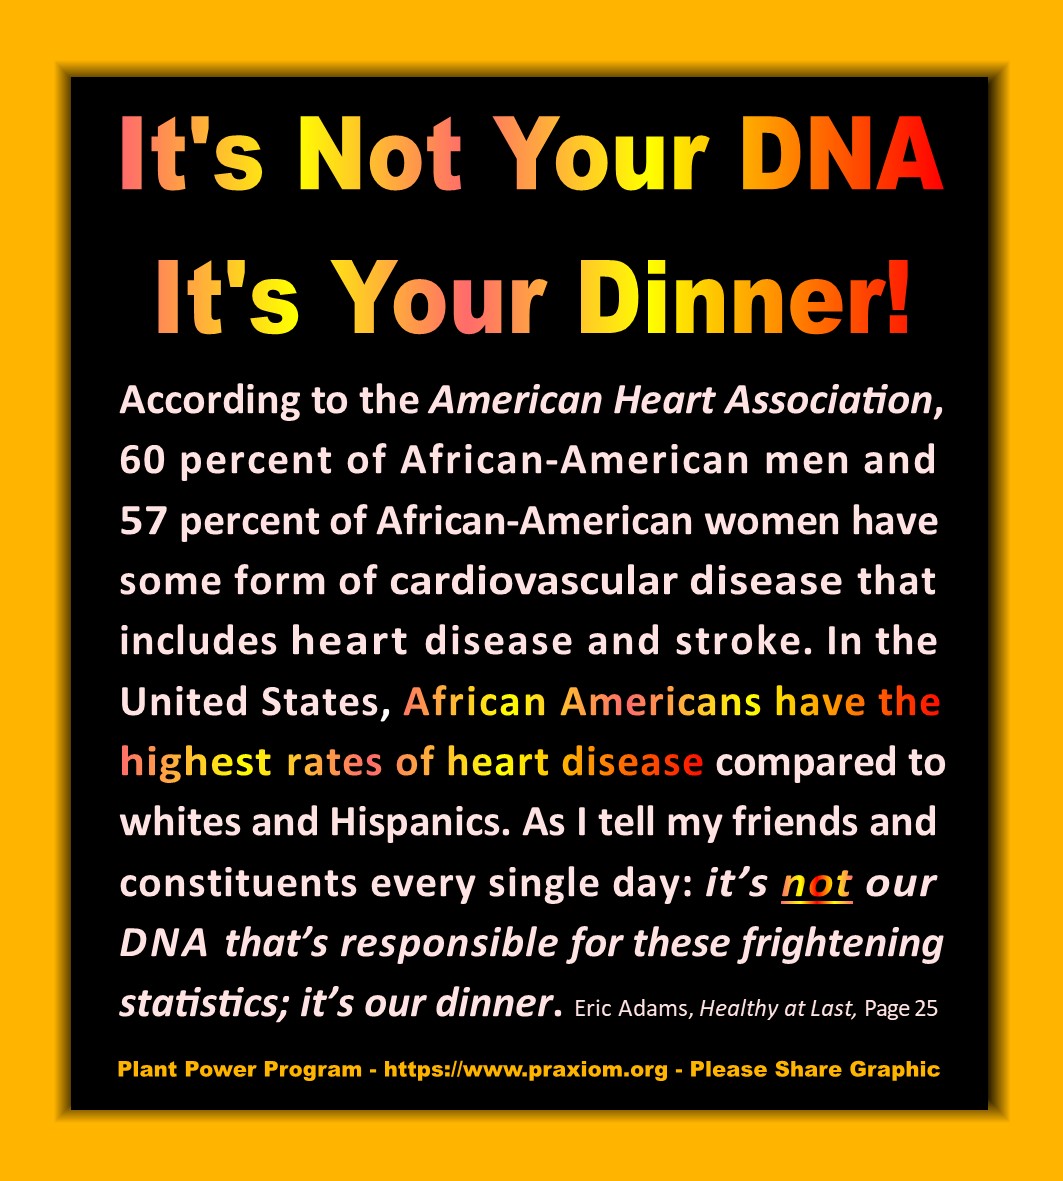 It's Not Your DNA - It's Your Dinner - Eric Adams